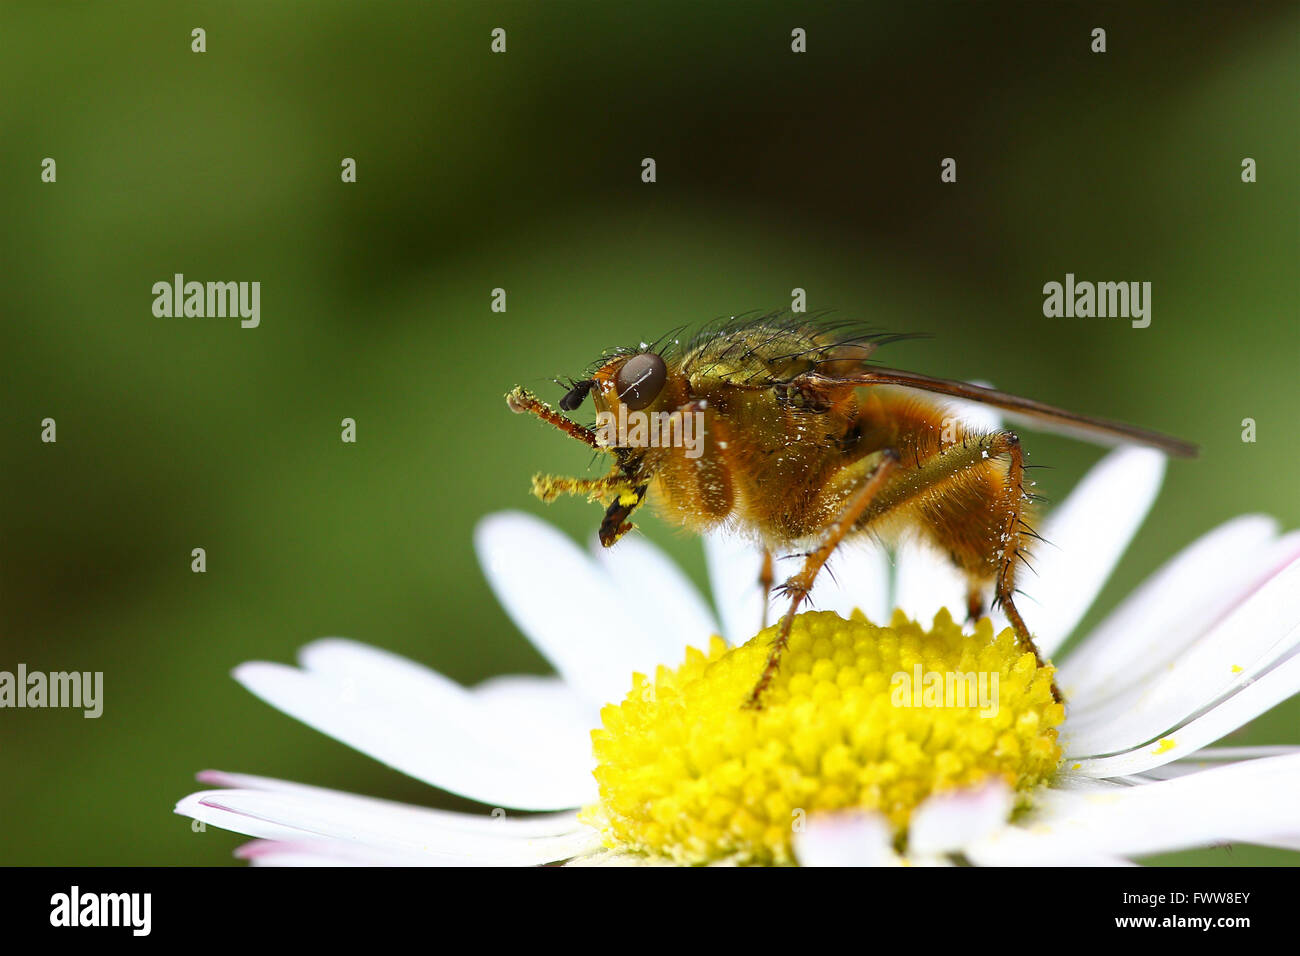 Fly on a daisy against a blurred green background Stock Photo